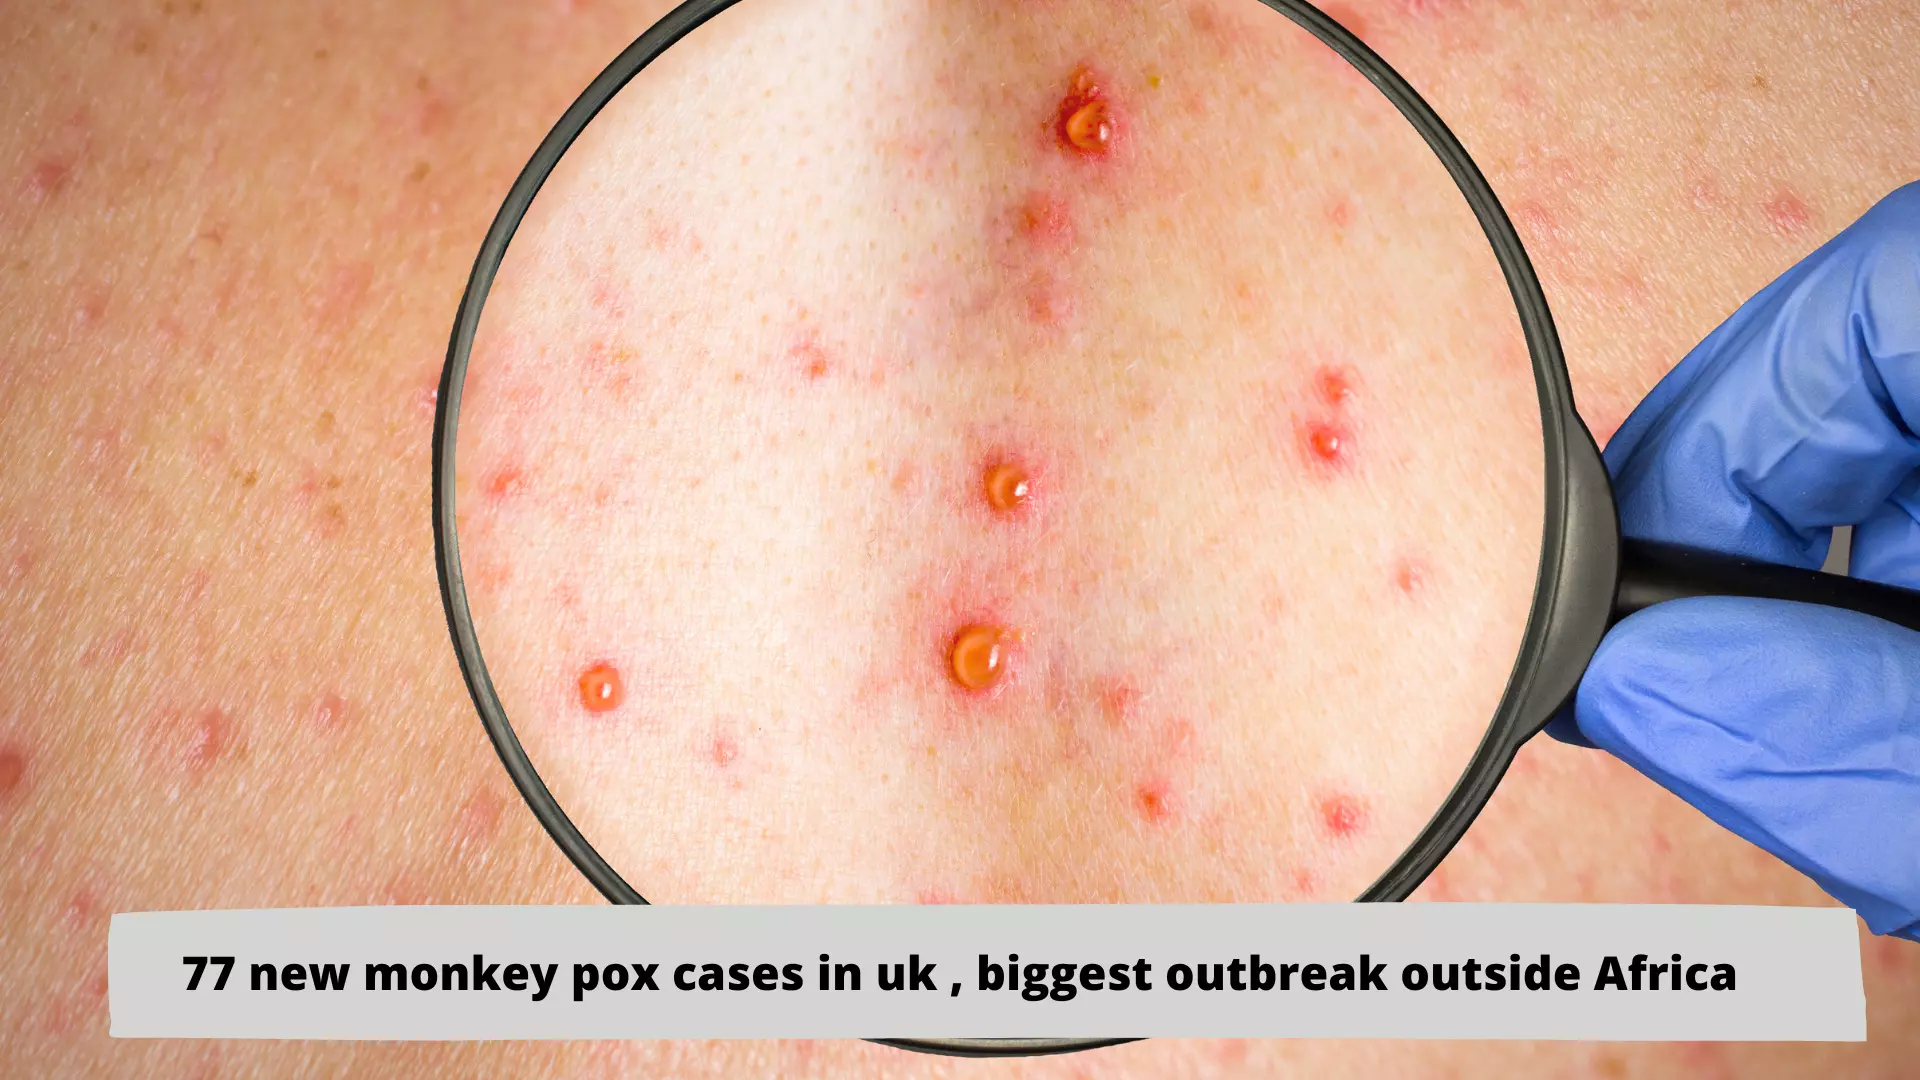 77 new monkey pox cases in UK, biggest outbreak outside Africa